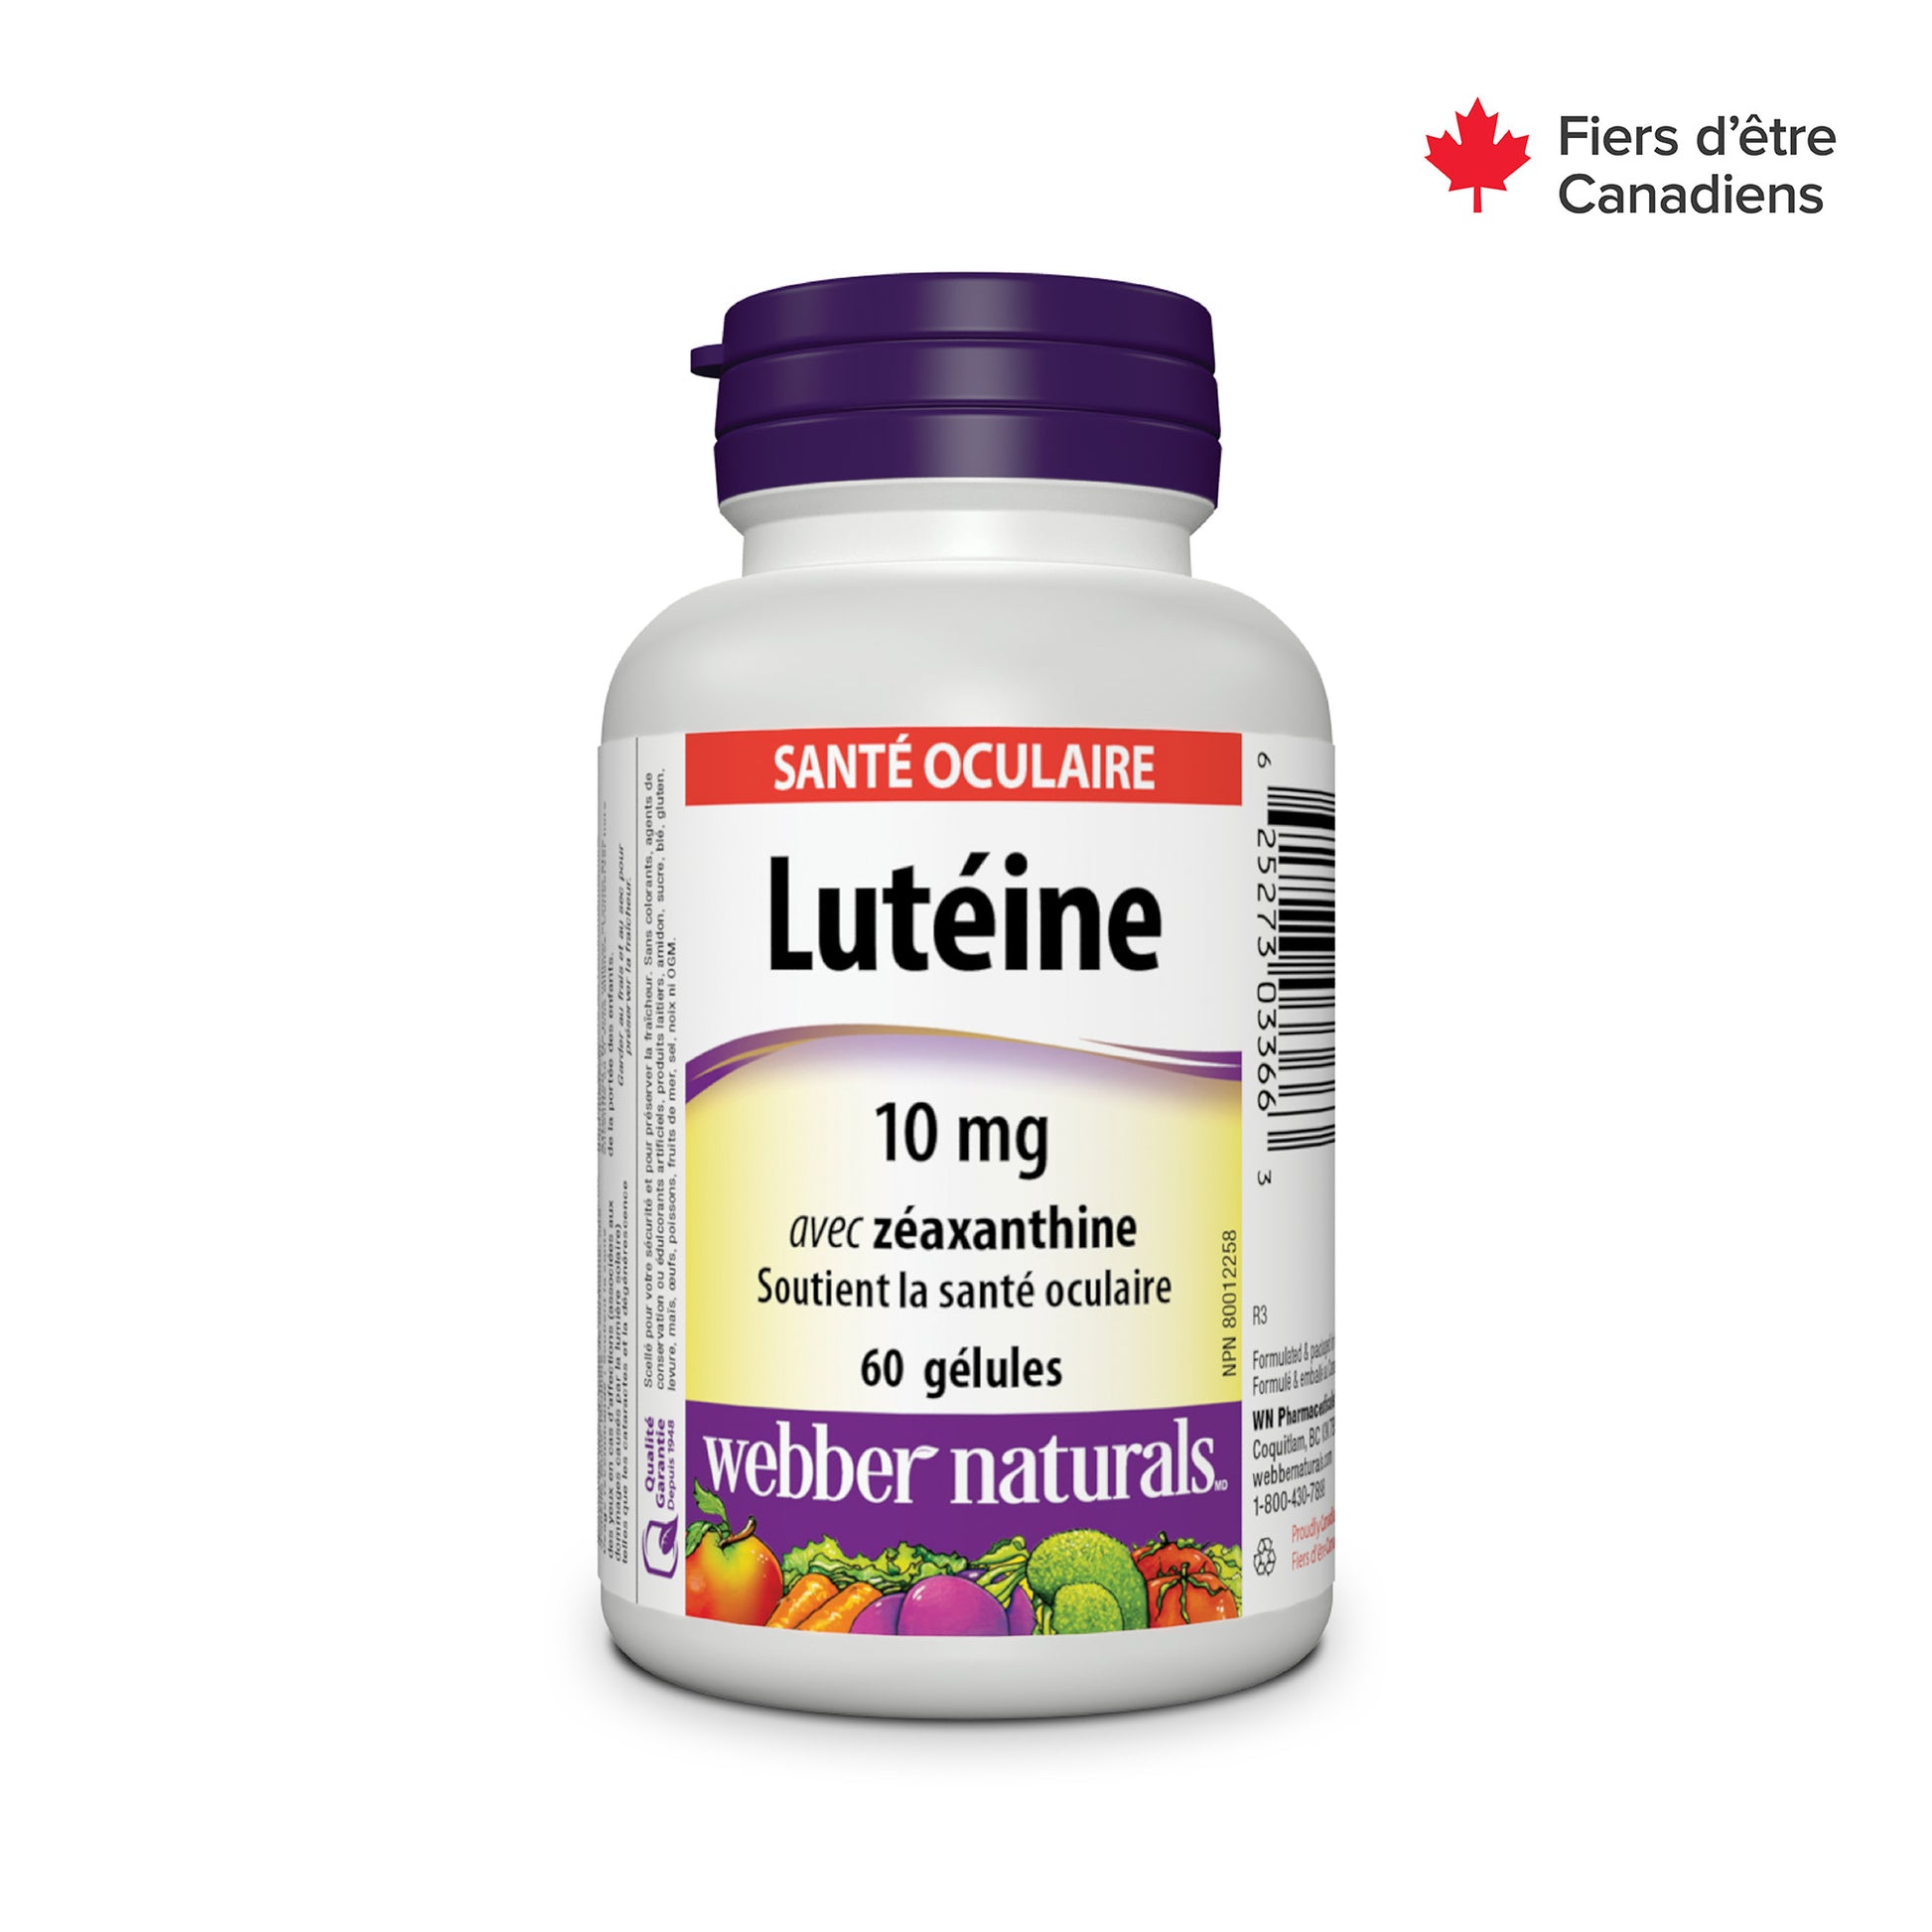 Lutein with Zeaxanthin 10 mg for Webber Naturals|v|hi-res|WN3366